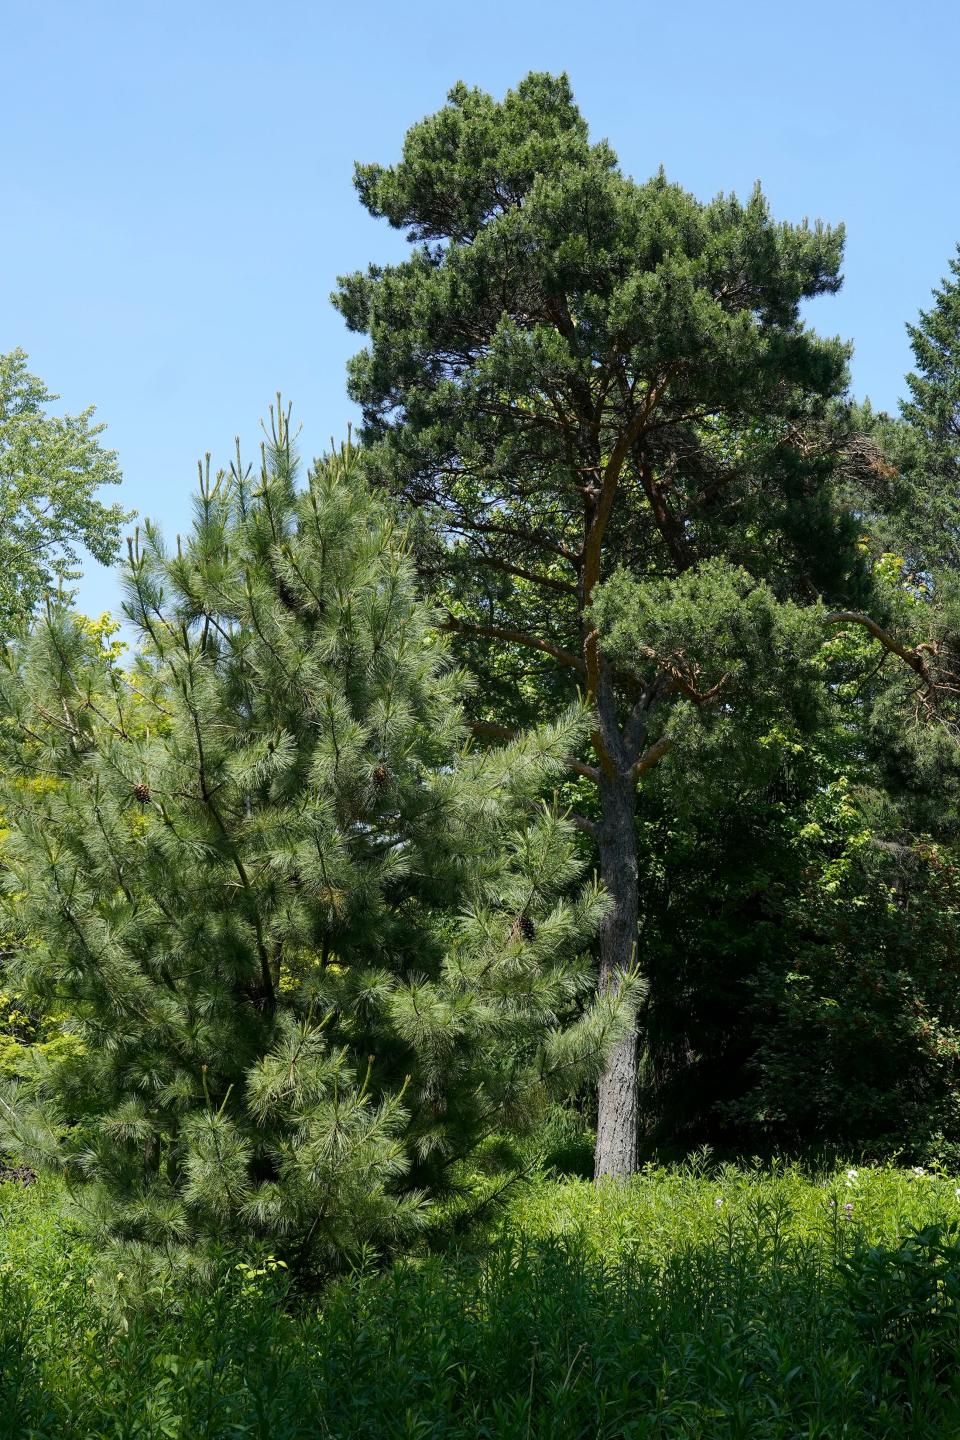 Scotch pines, right, are among the trees in a mature pine forest on the River Hills property of David and Dedi Knox, seen on June 9, 2023.